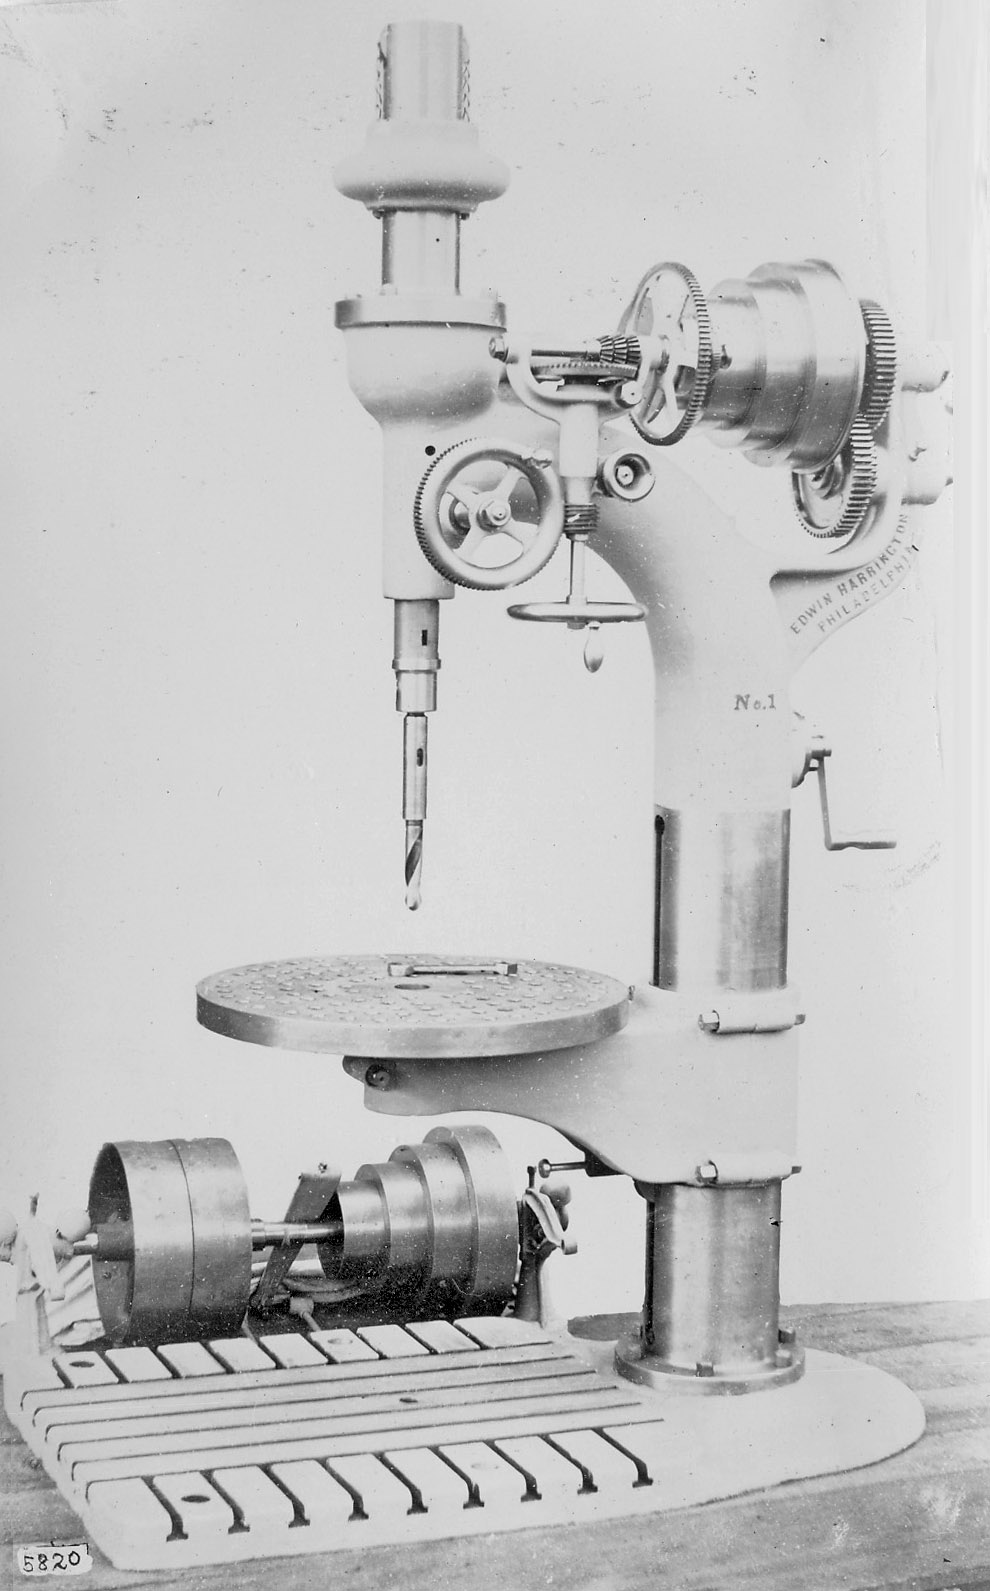 Edwin Harrington 25 and 36 inch Drills, pages 74-75